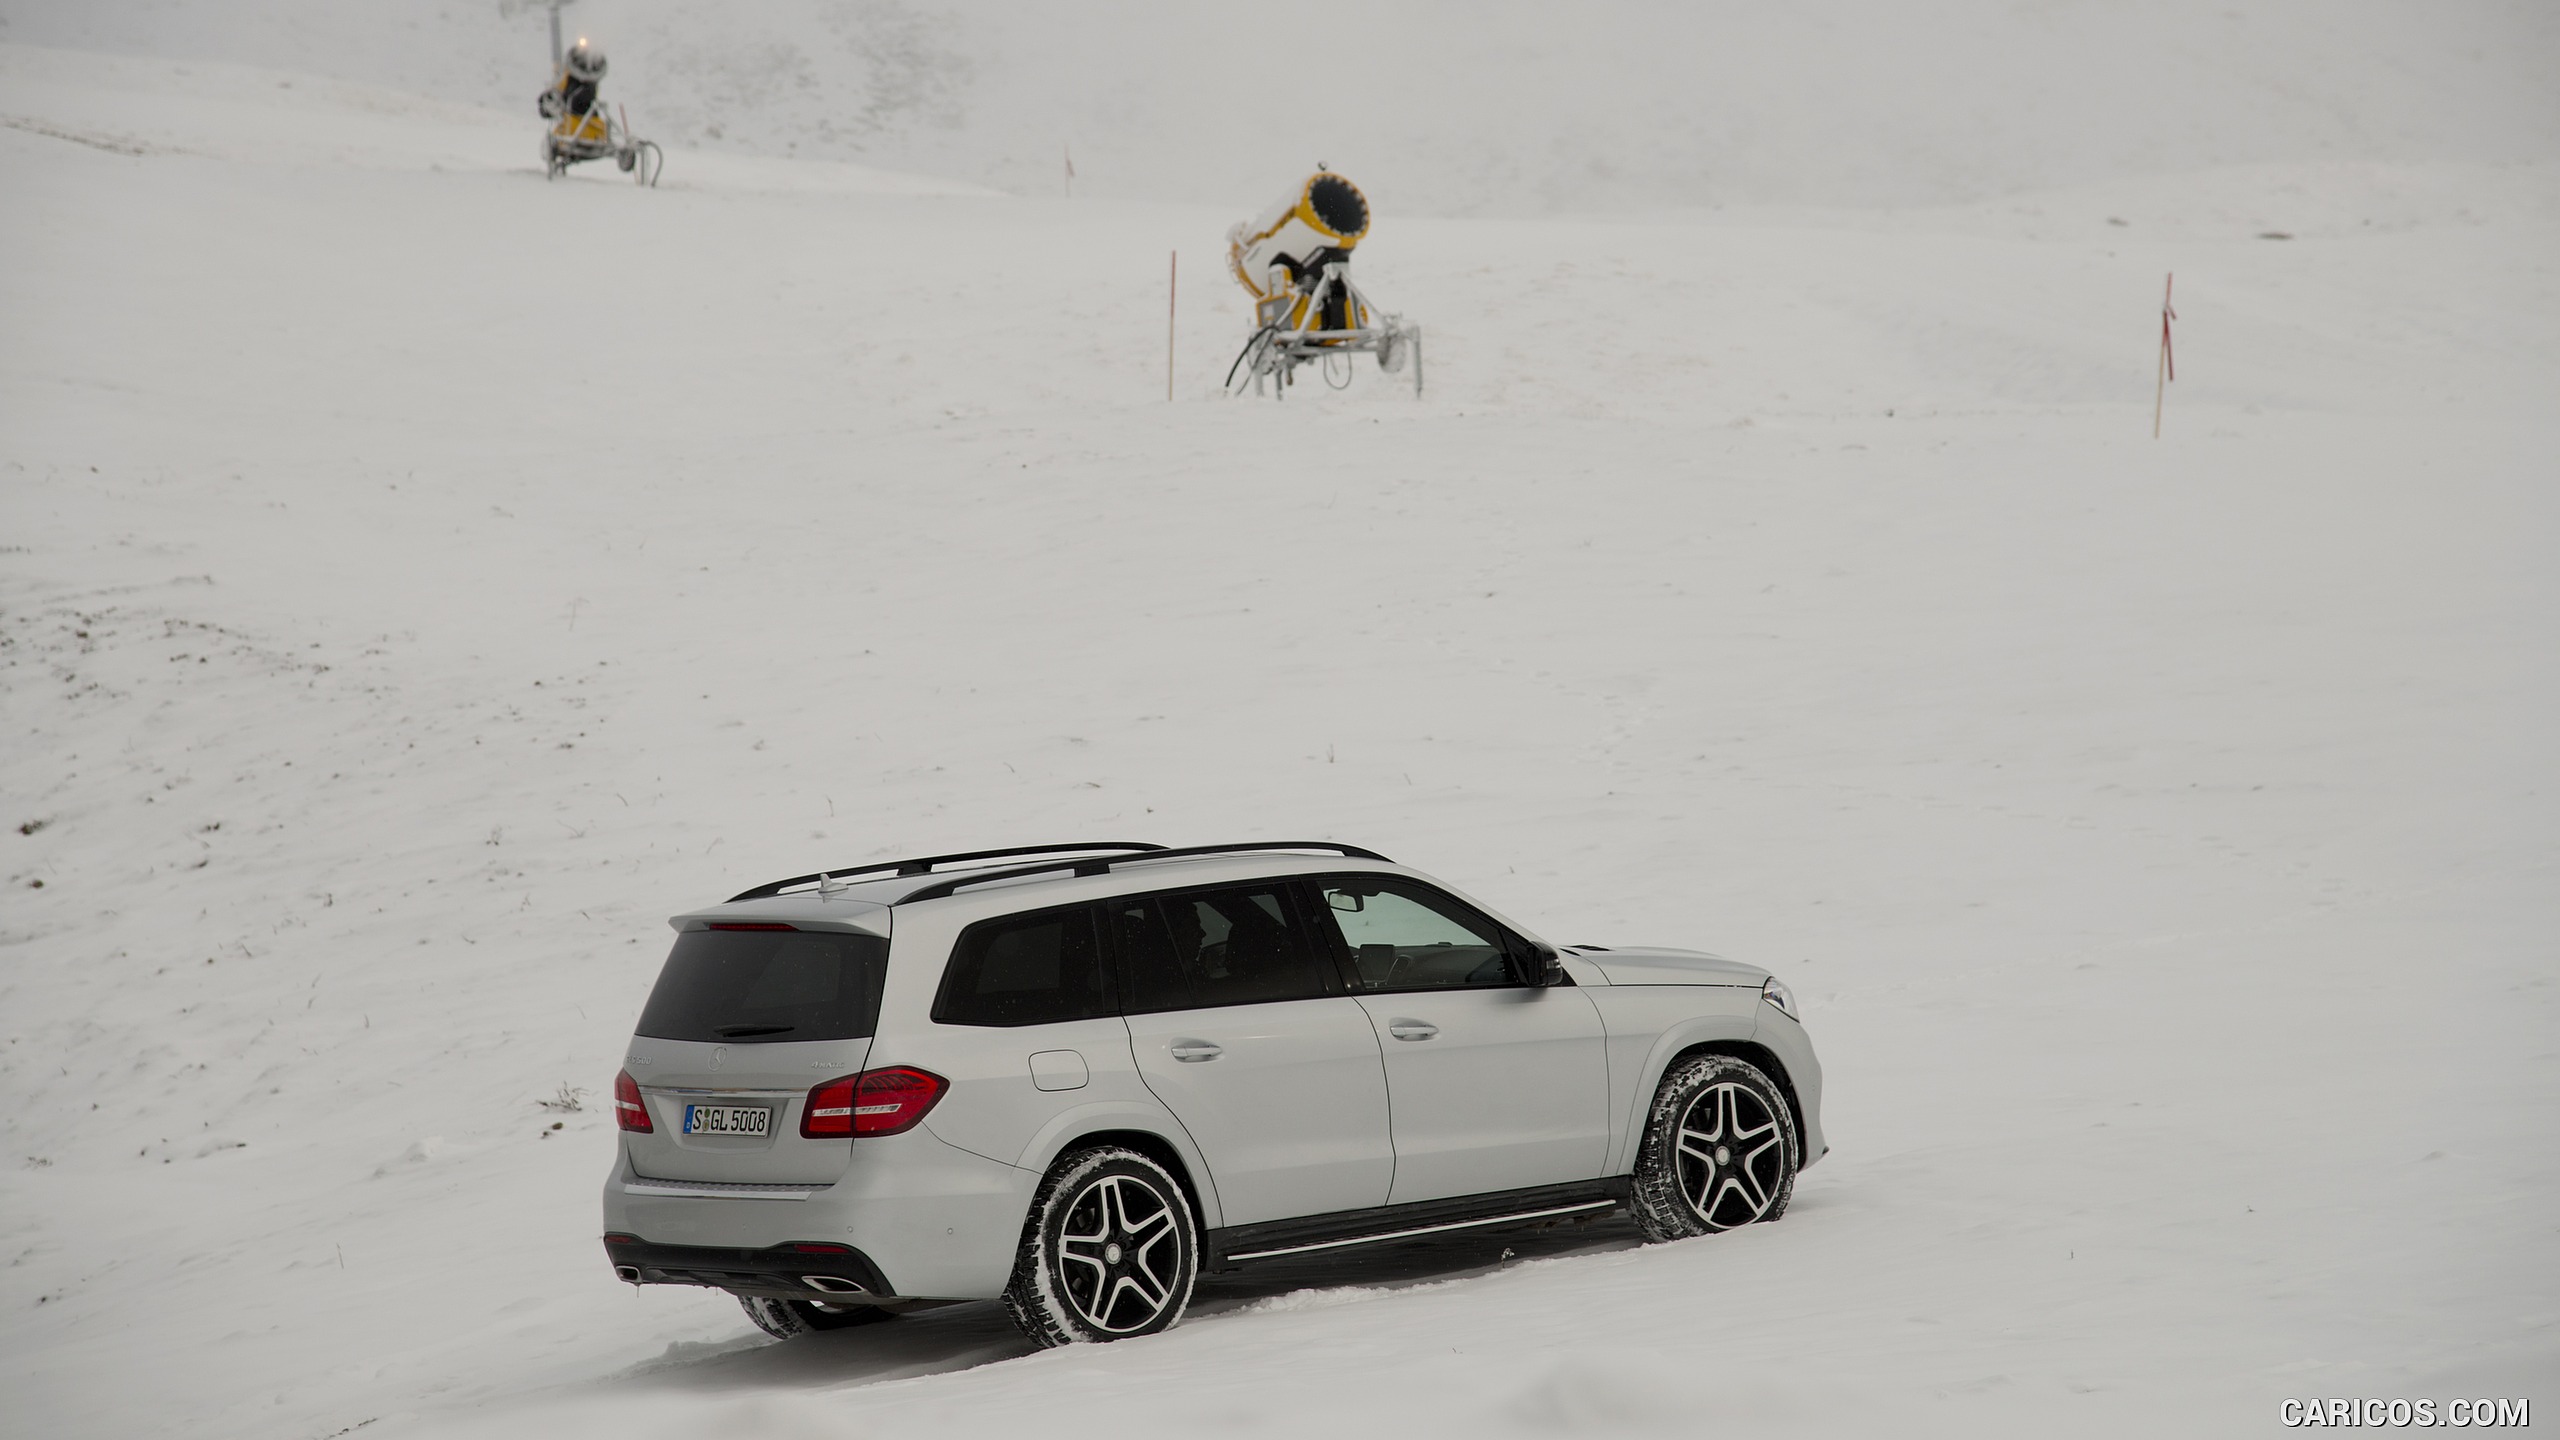 2017 Mercedes-Benz GLS 500 4MATIC AMG Line in Snow - Side, #157 of 255